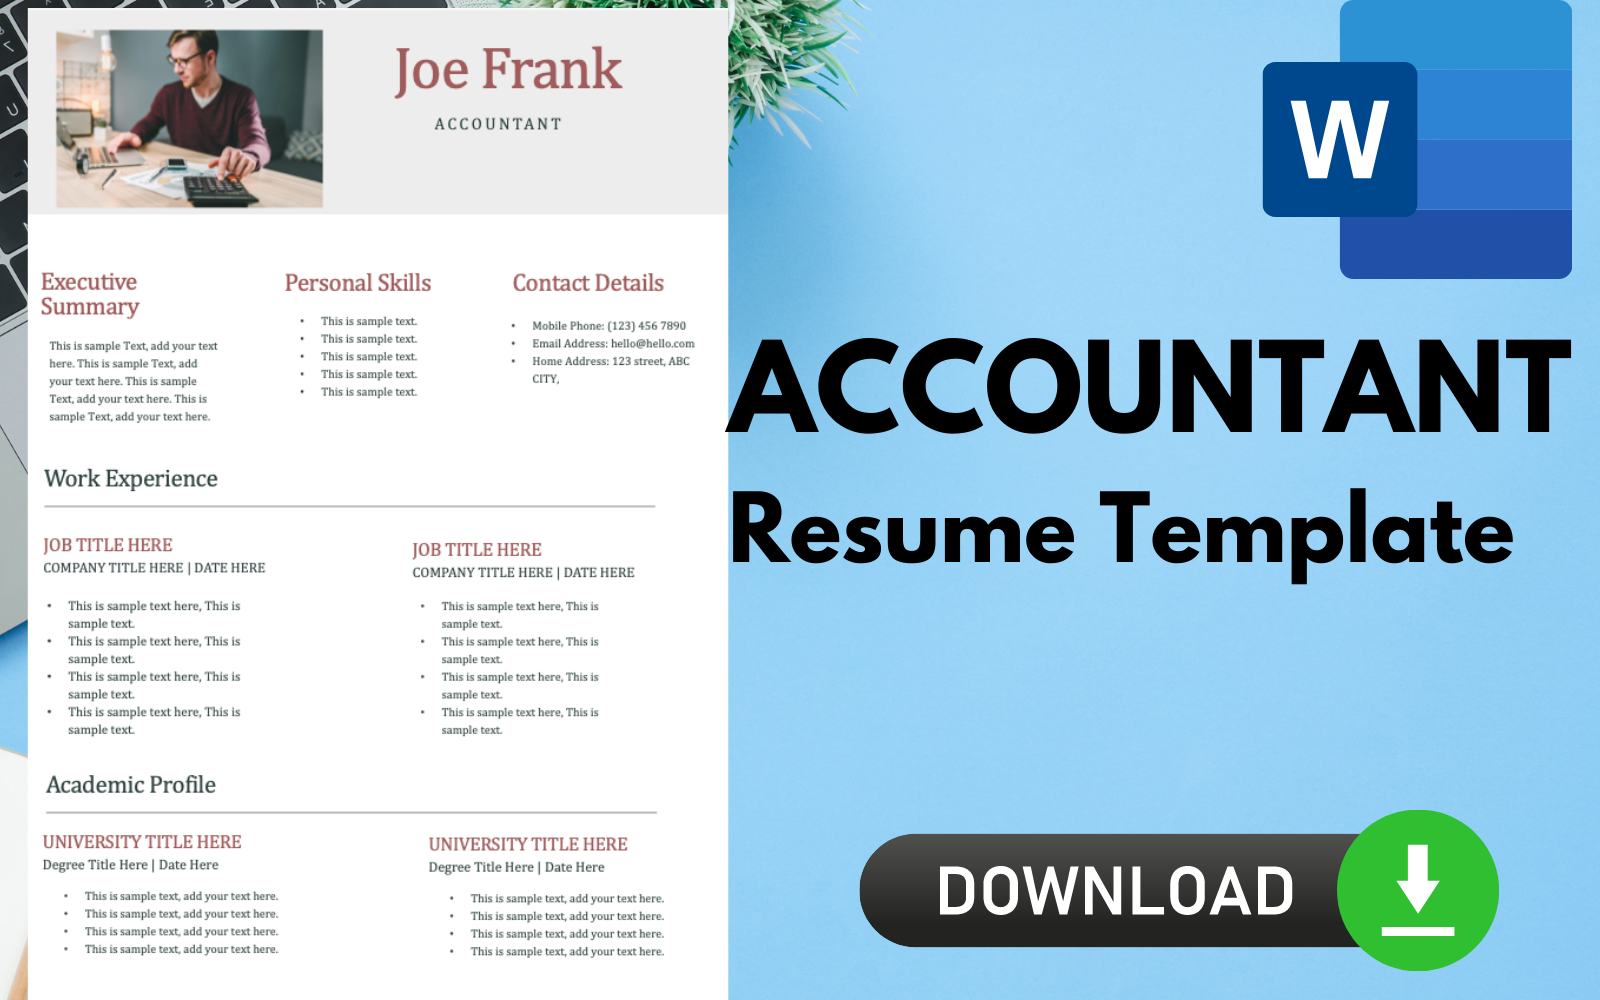 Modern ONE-PAGE Resume / CV Template for ACCOUNTANTS.